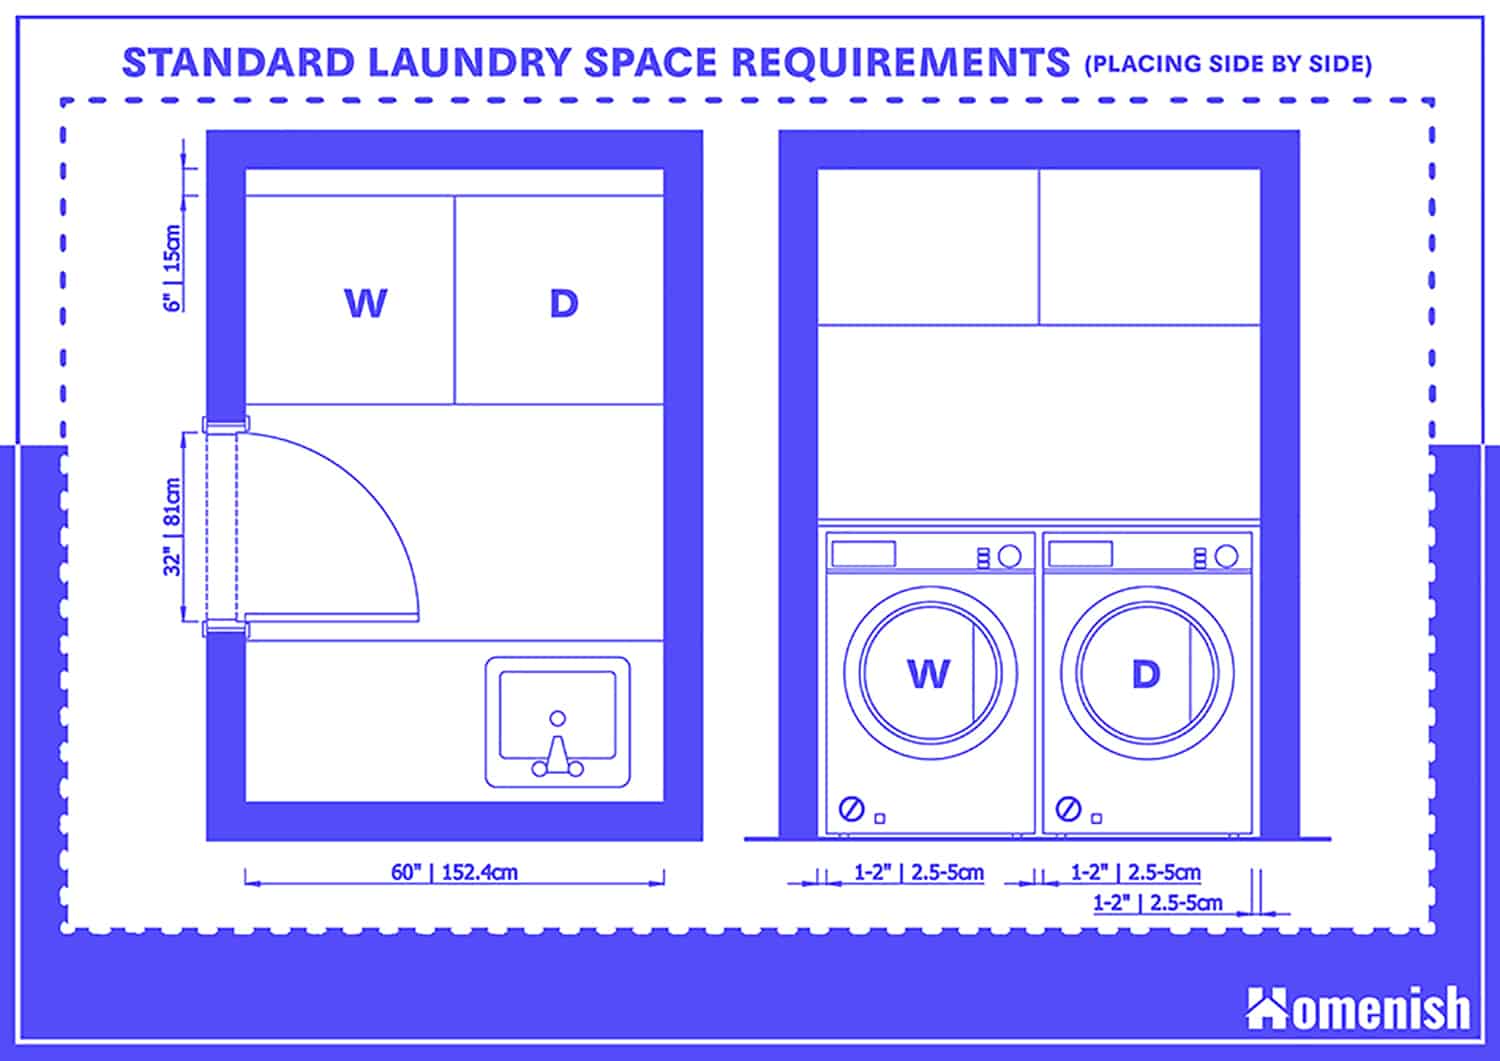 Standard Laundry Space Requirements (Placing Washer & Dryer Side by Side)